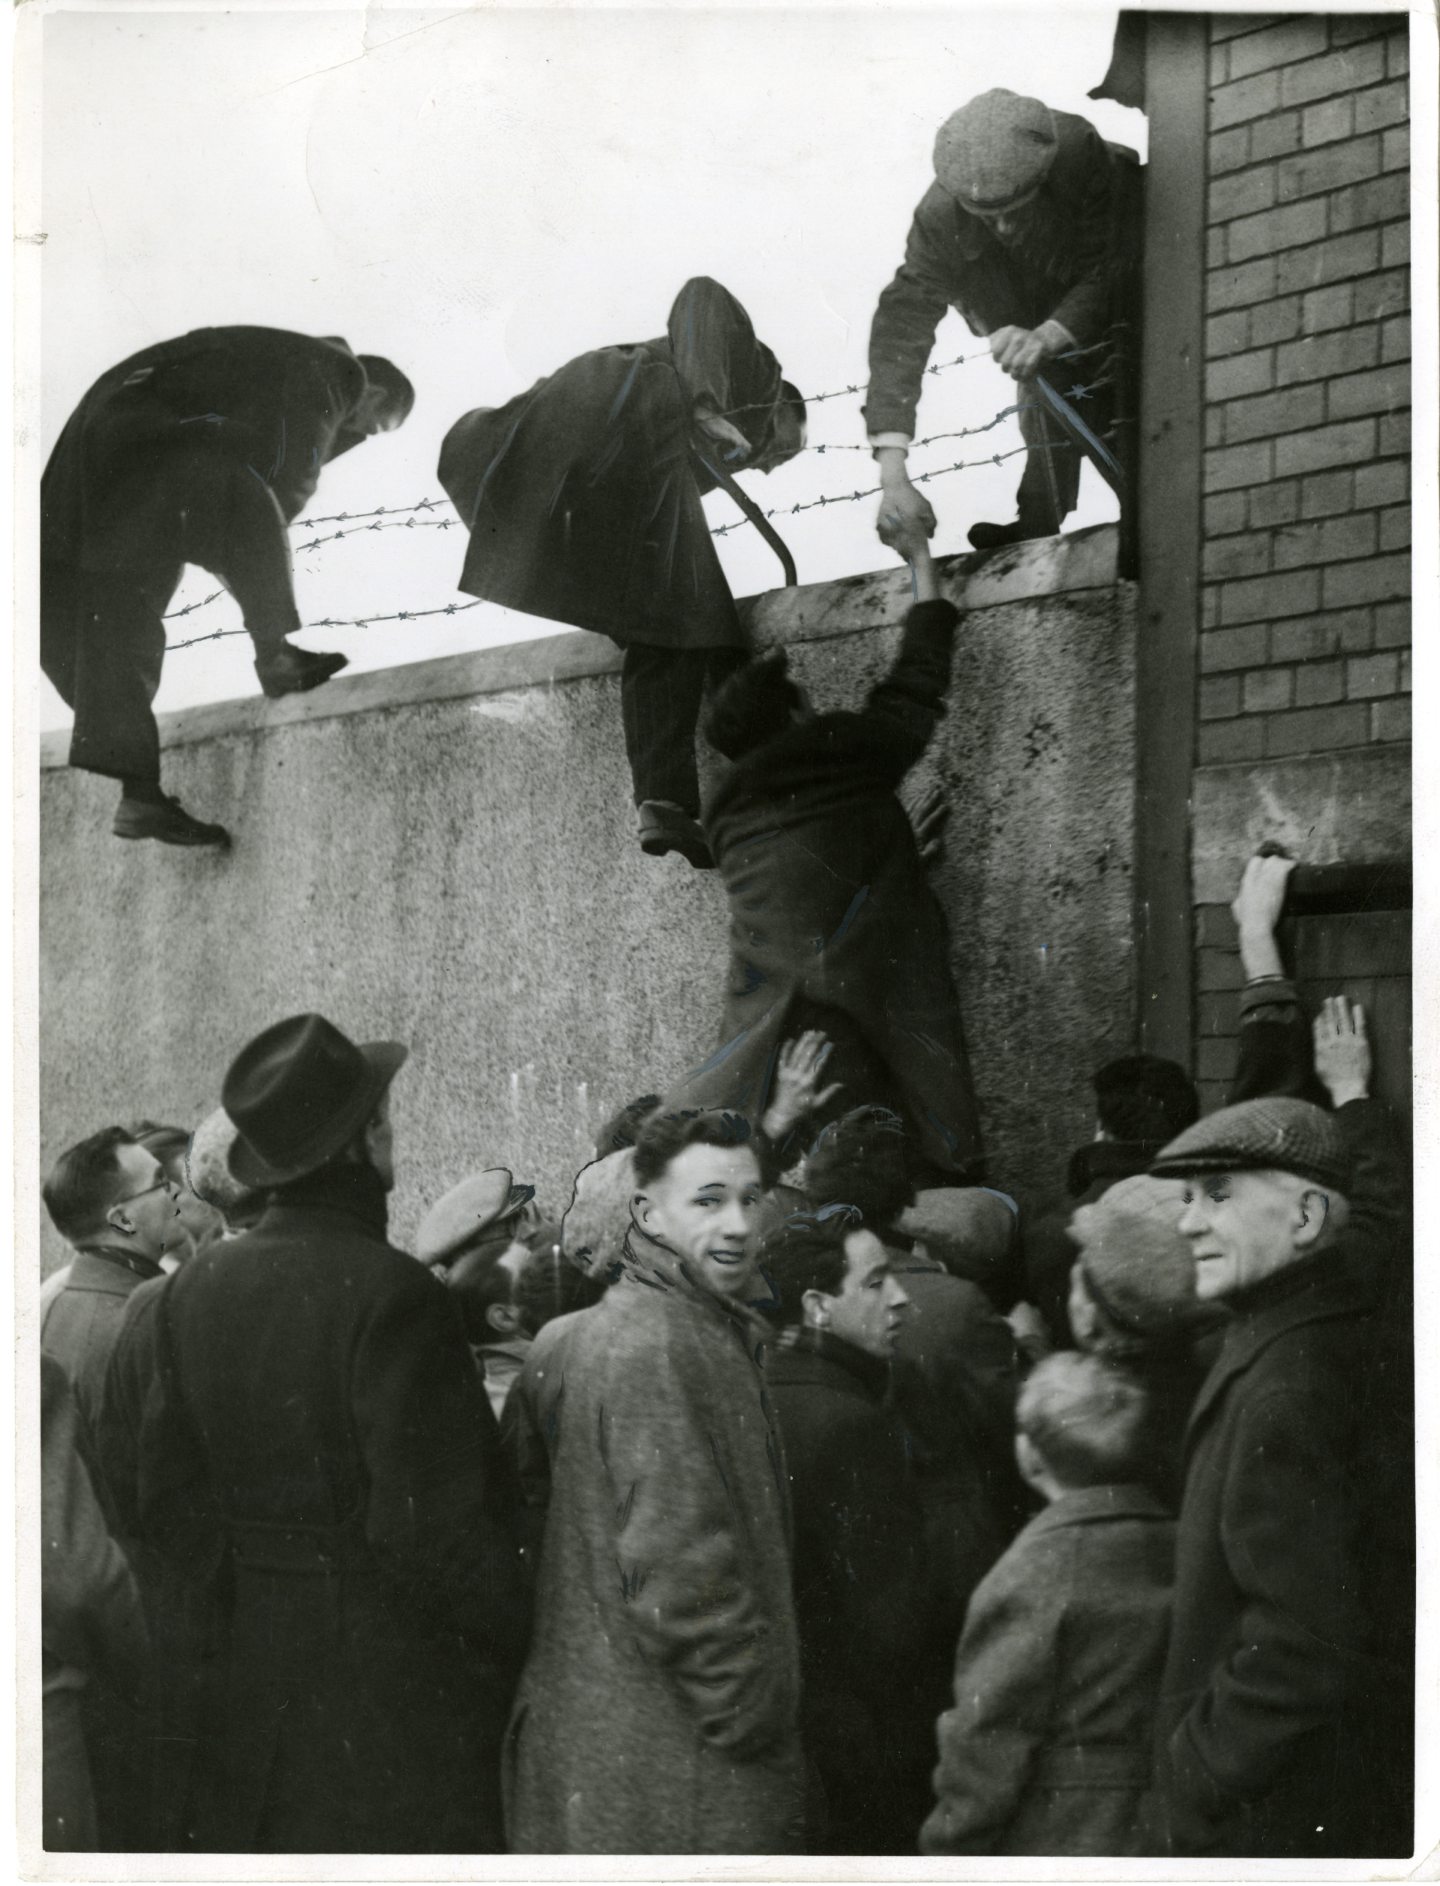 Fans scale the walls at Dens Park so they can watch the game taking place between Dundee and Rangers in January 1949.